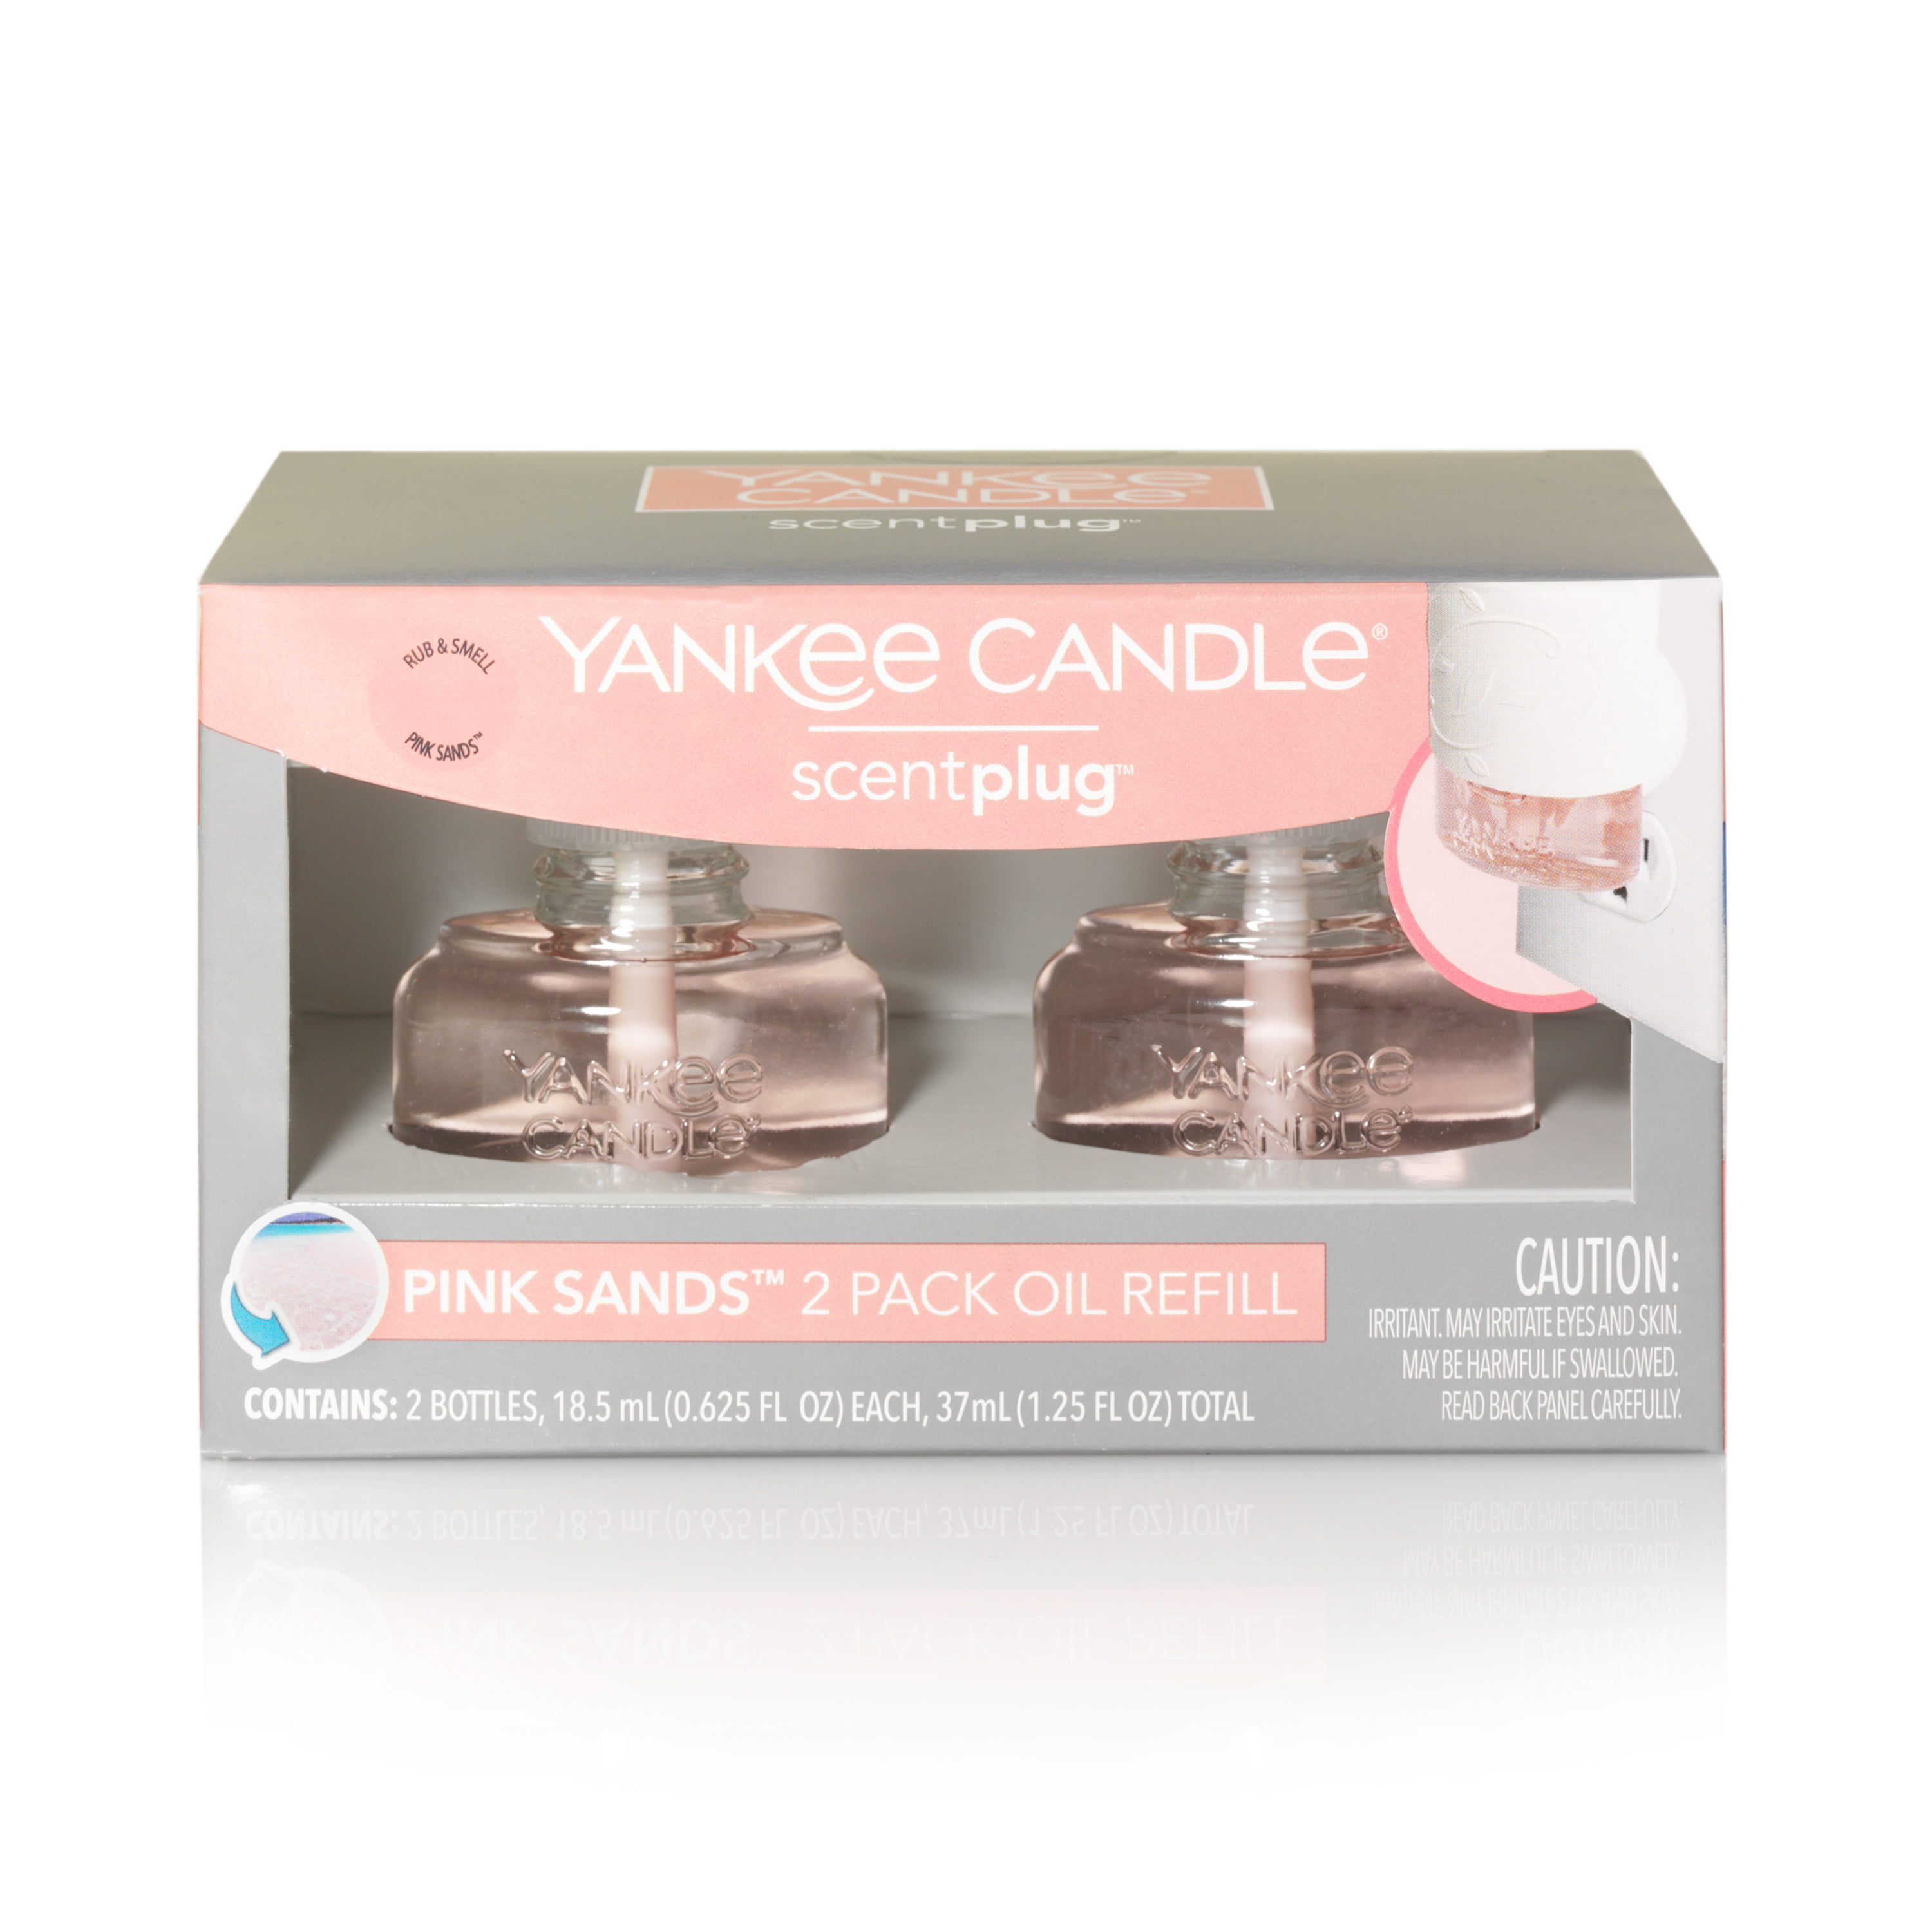 Yankee Candle 4x PINK SANDS Scent Plug In Refills ~ FREE SHIP 